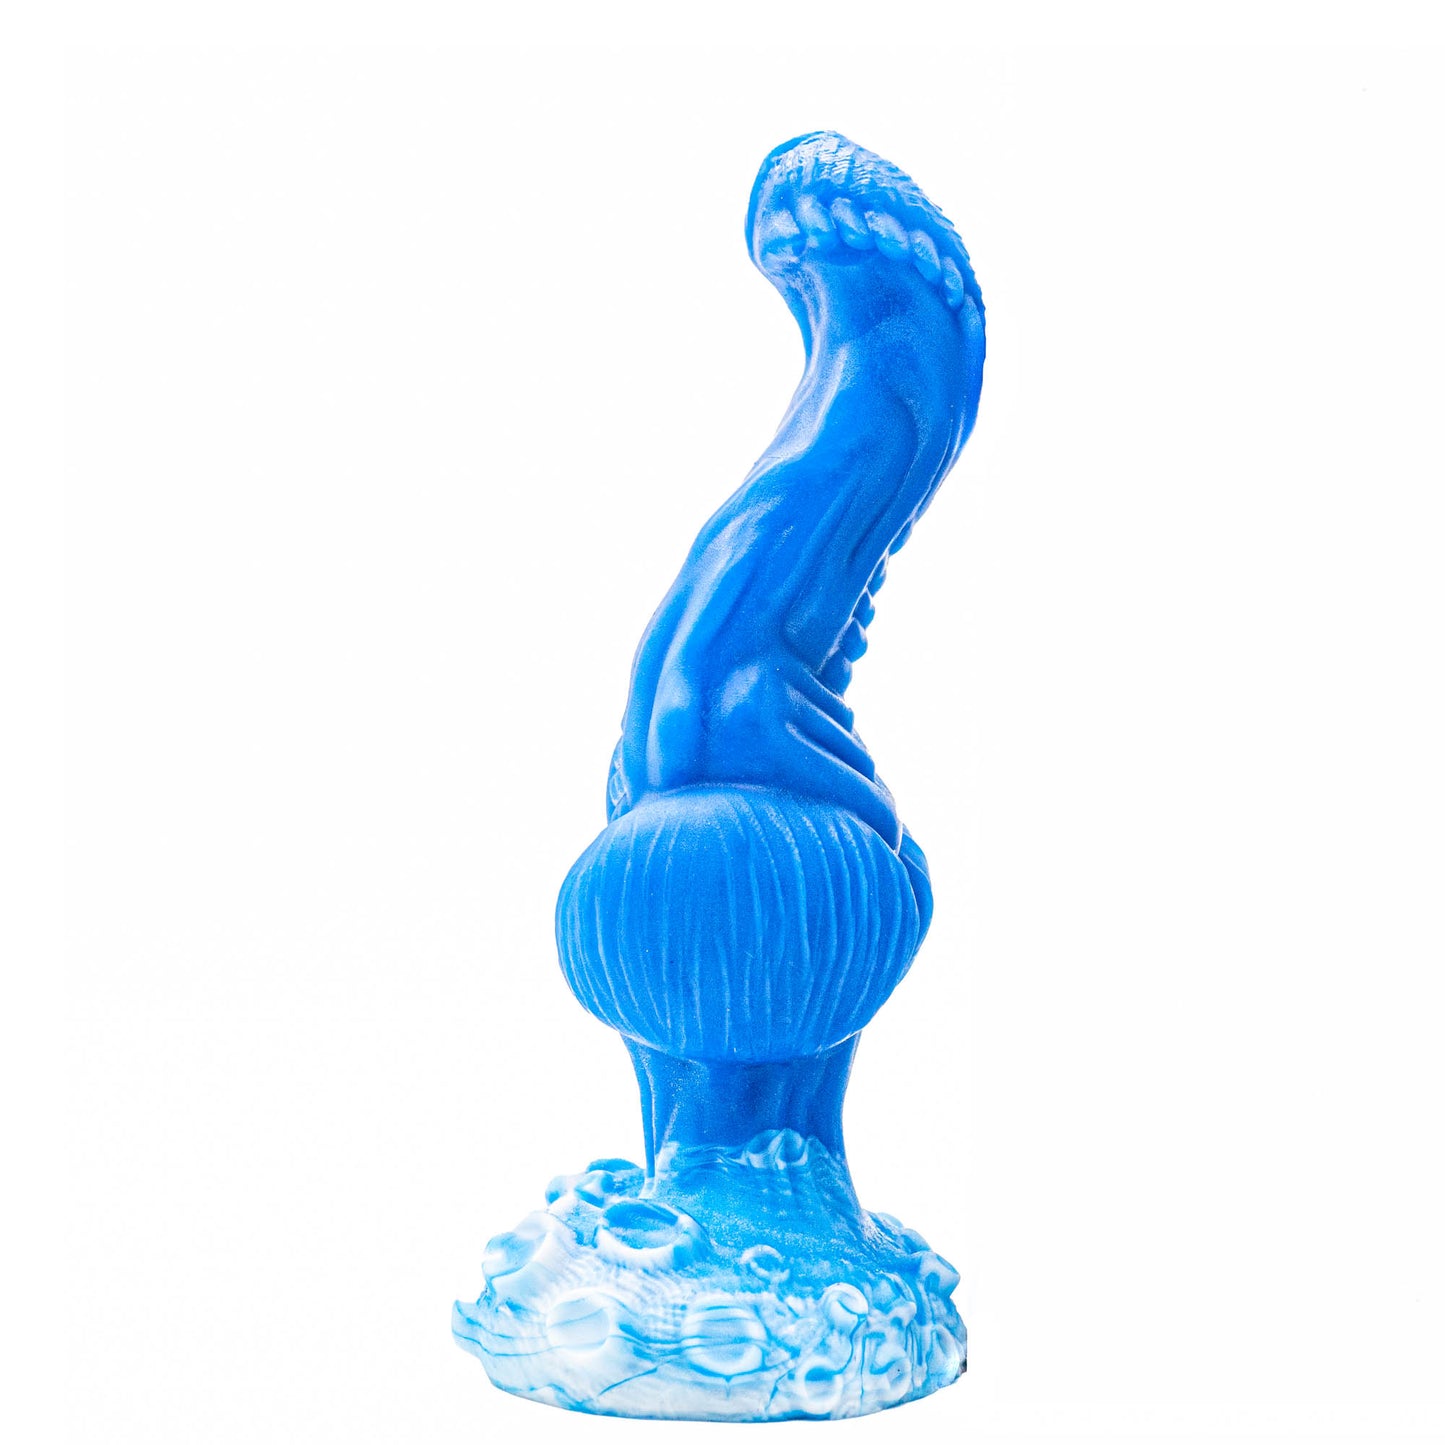 DOMINUS the Knotted Dildo